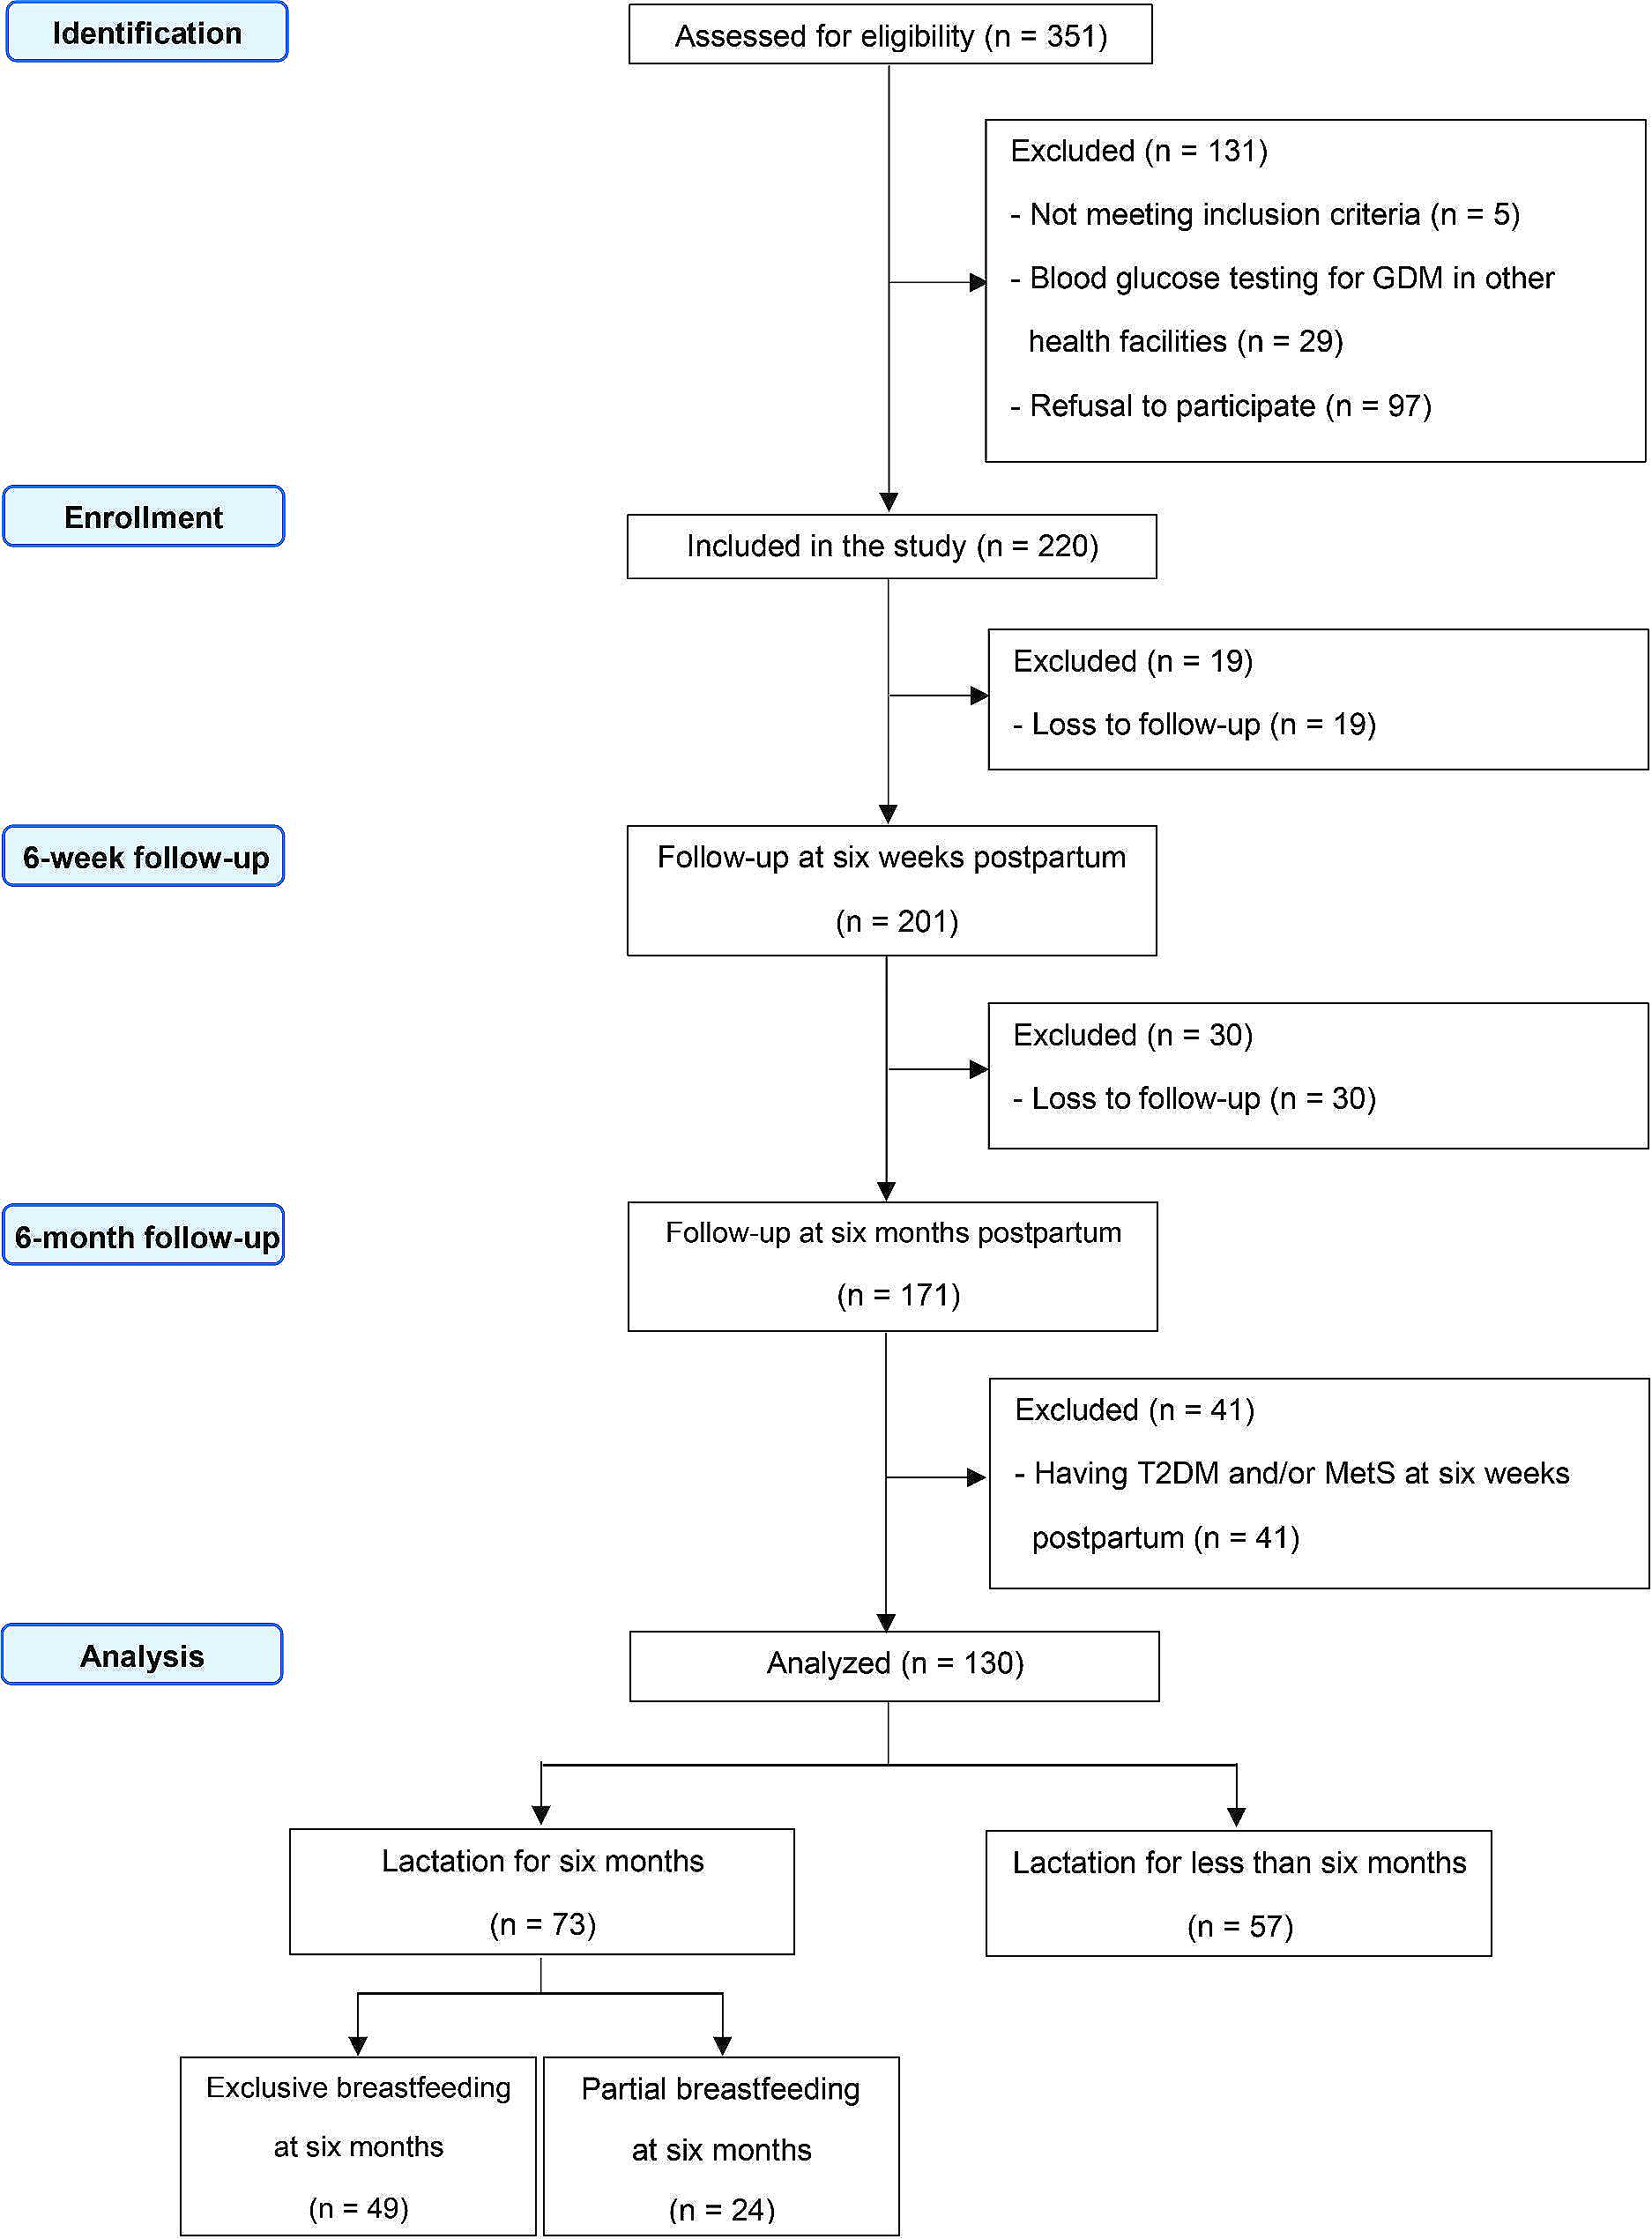 Lactation duration and development of type 2 diabetes and metabolic syndrome in postpartum women with recent gestational diabetes mellitus